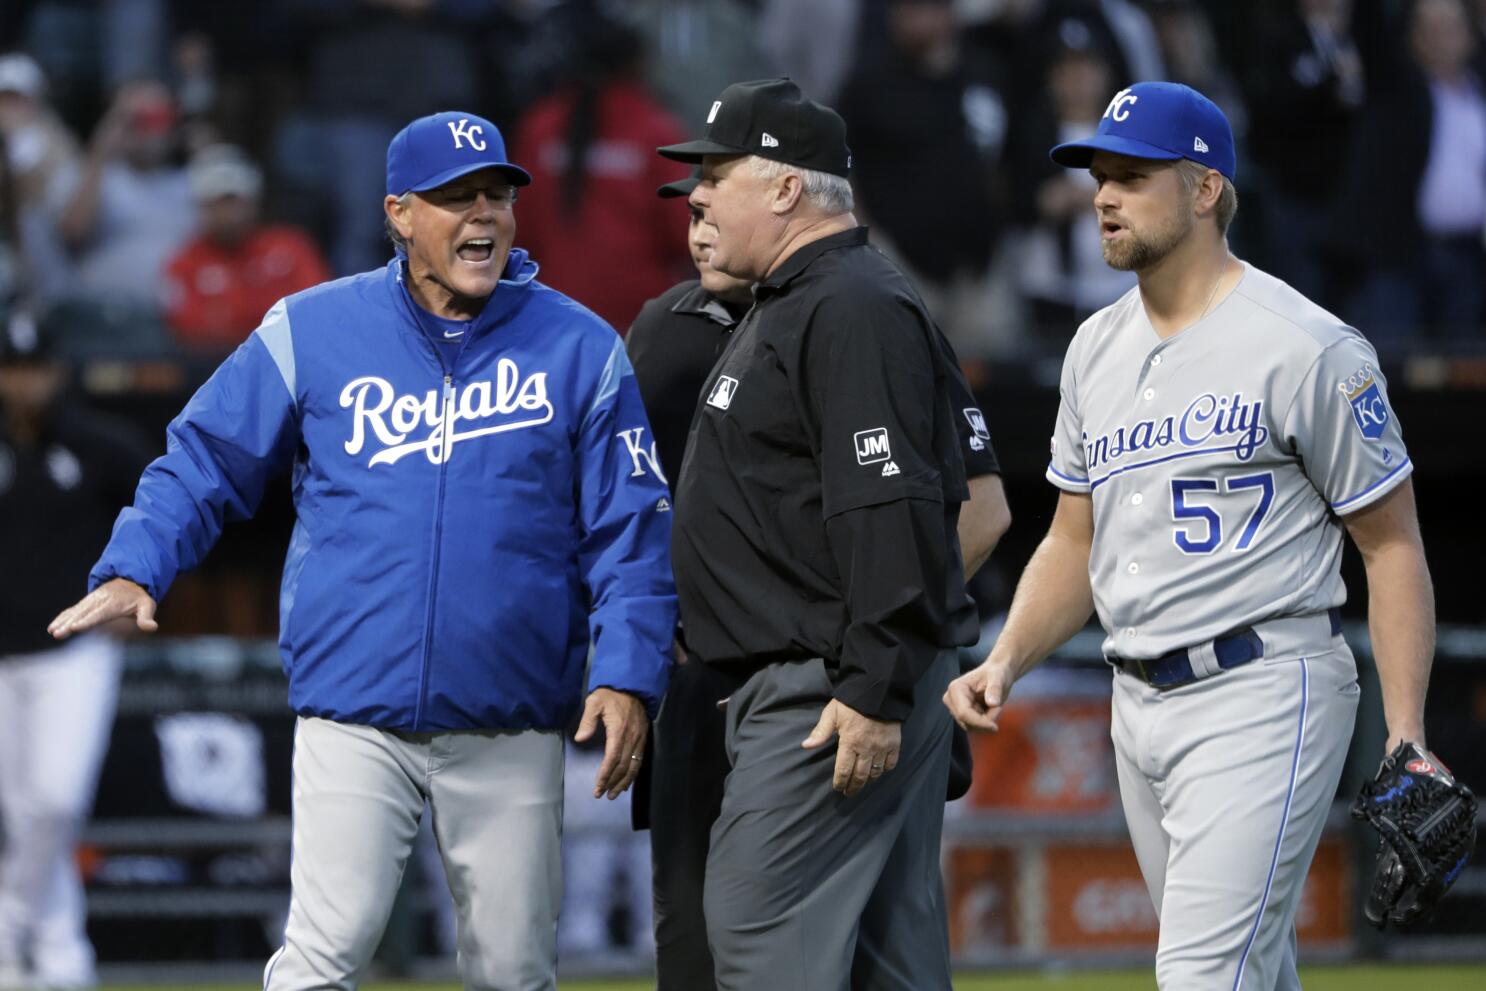 Sports Report: Royals Crush Giants 10-0, Bring Series To Game 7